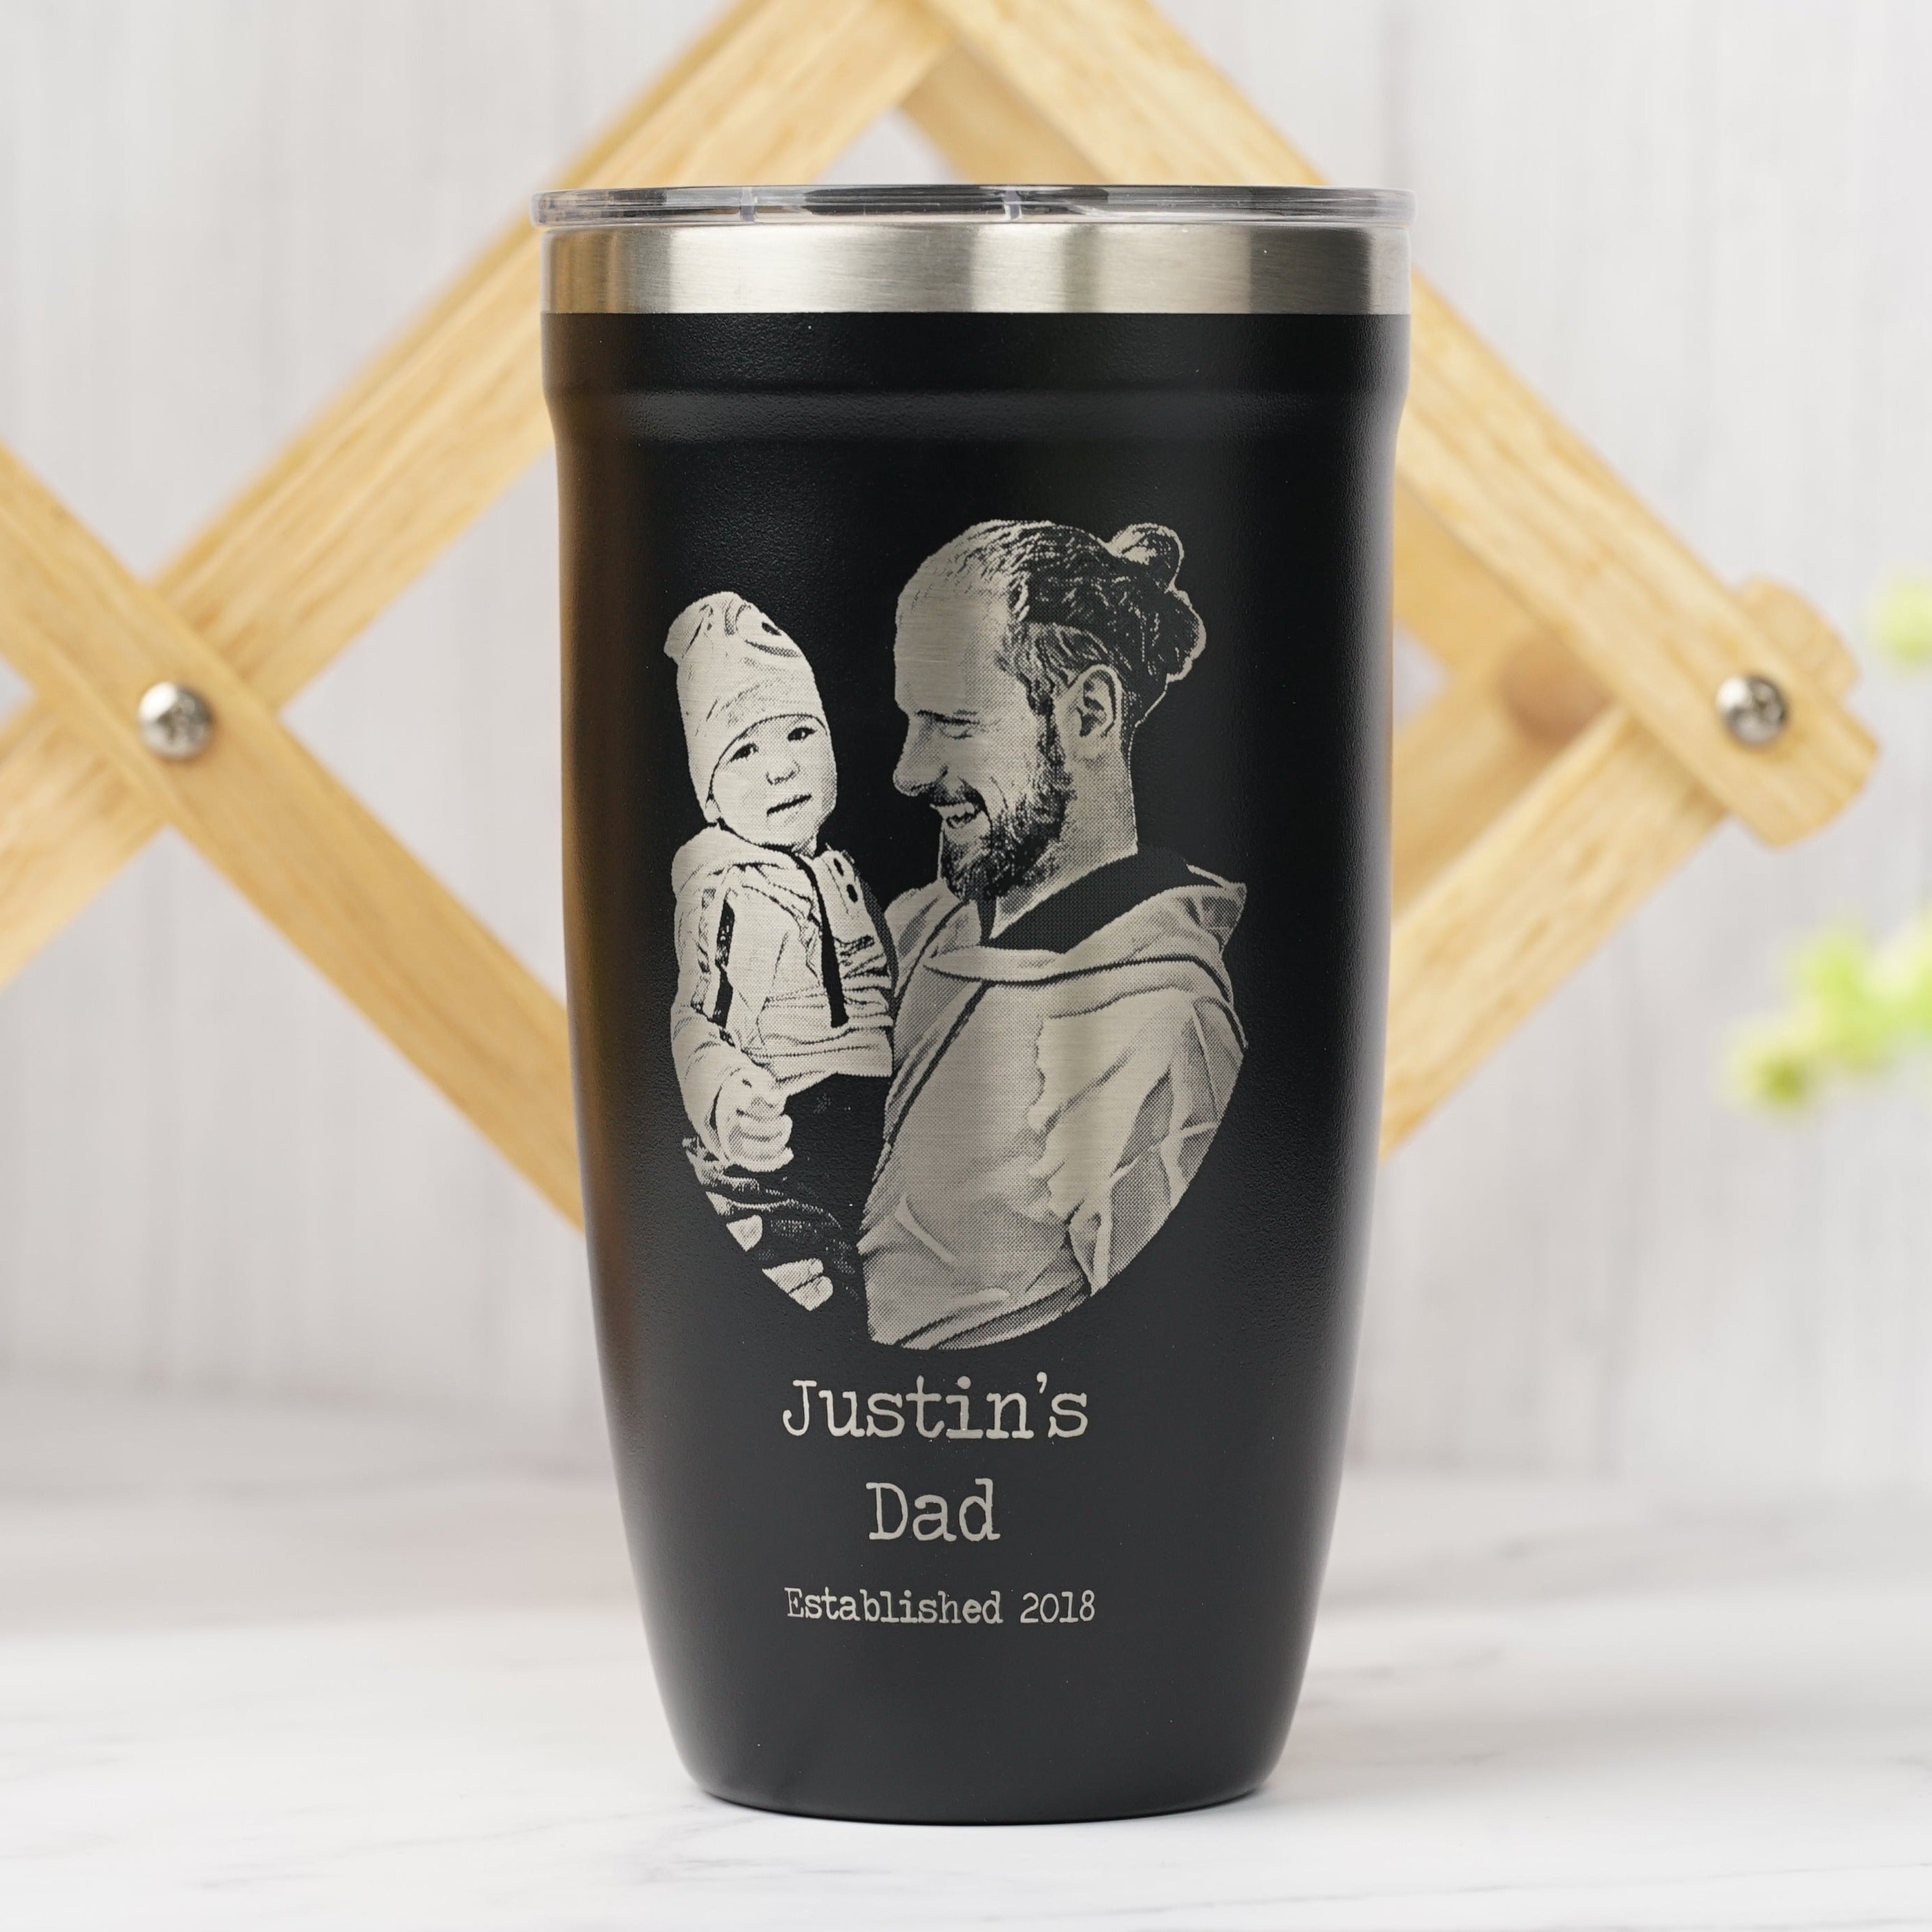 Custom engraved drinkware for Fathers, featuring personalized mugs and tumblers with heartfelt messages and designs, ideal for celebrating and appreciating dads.